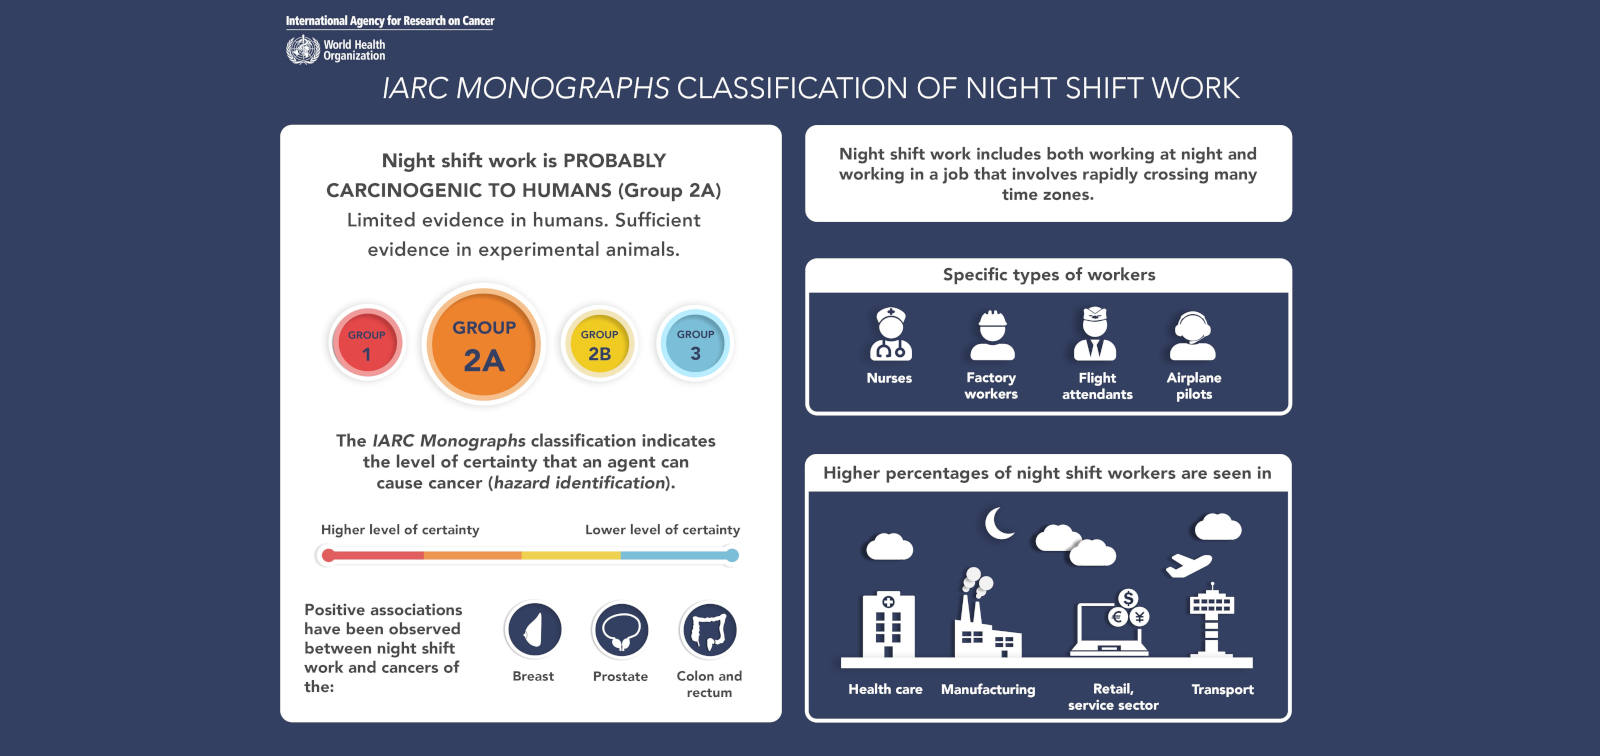 IARC Retains “Probably Carcinogenic” Classification for Night Shift Work